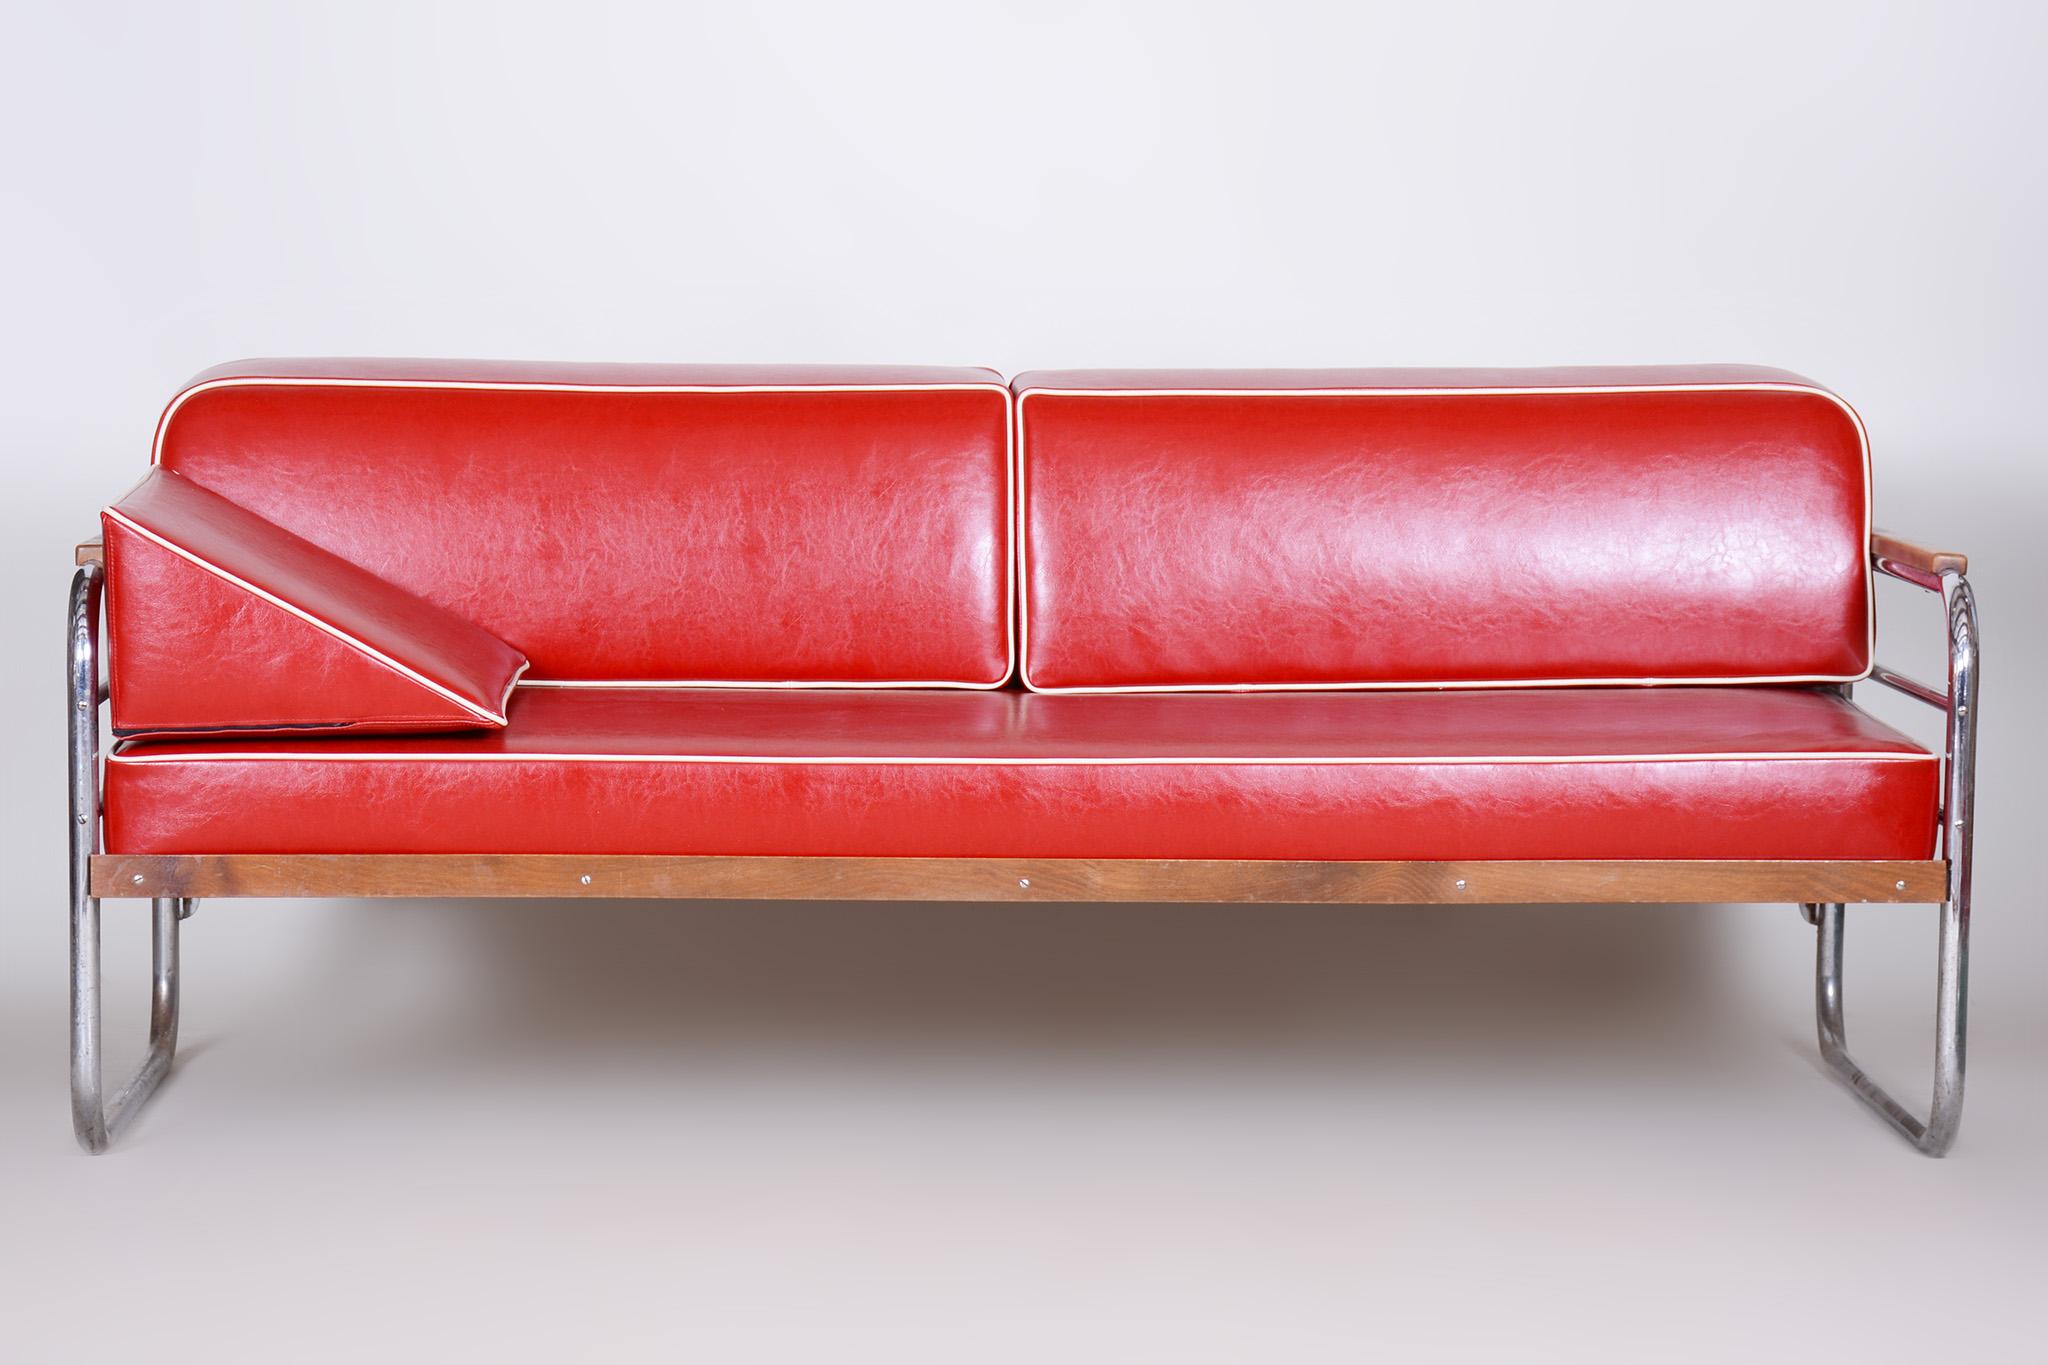 Red high-quality leather Bauhaus sofa with chrome tubular steel frame.

Period : 1930-1939.
Source : Czechia (Czechoslovakia).
Maker : Thonet
Material : Beech, high-quality leather, chrome-plated steel.

The chrome is in excellent